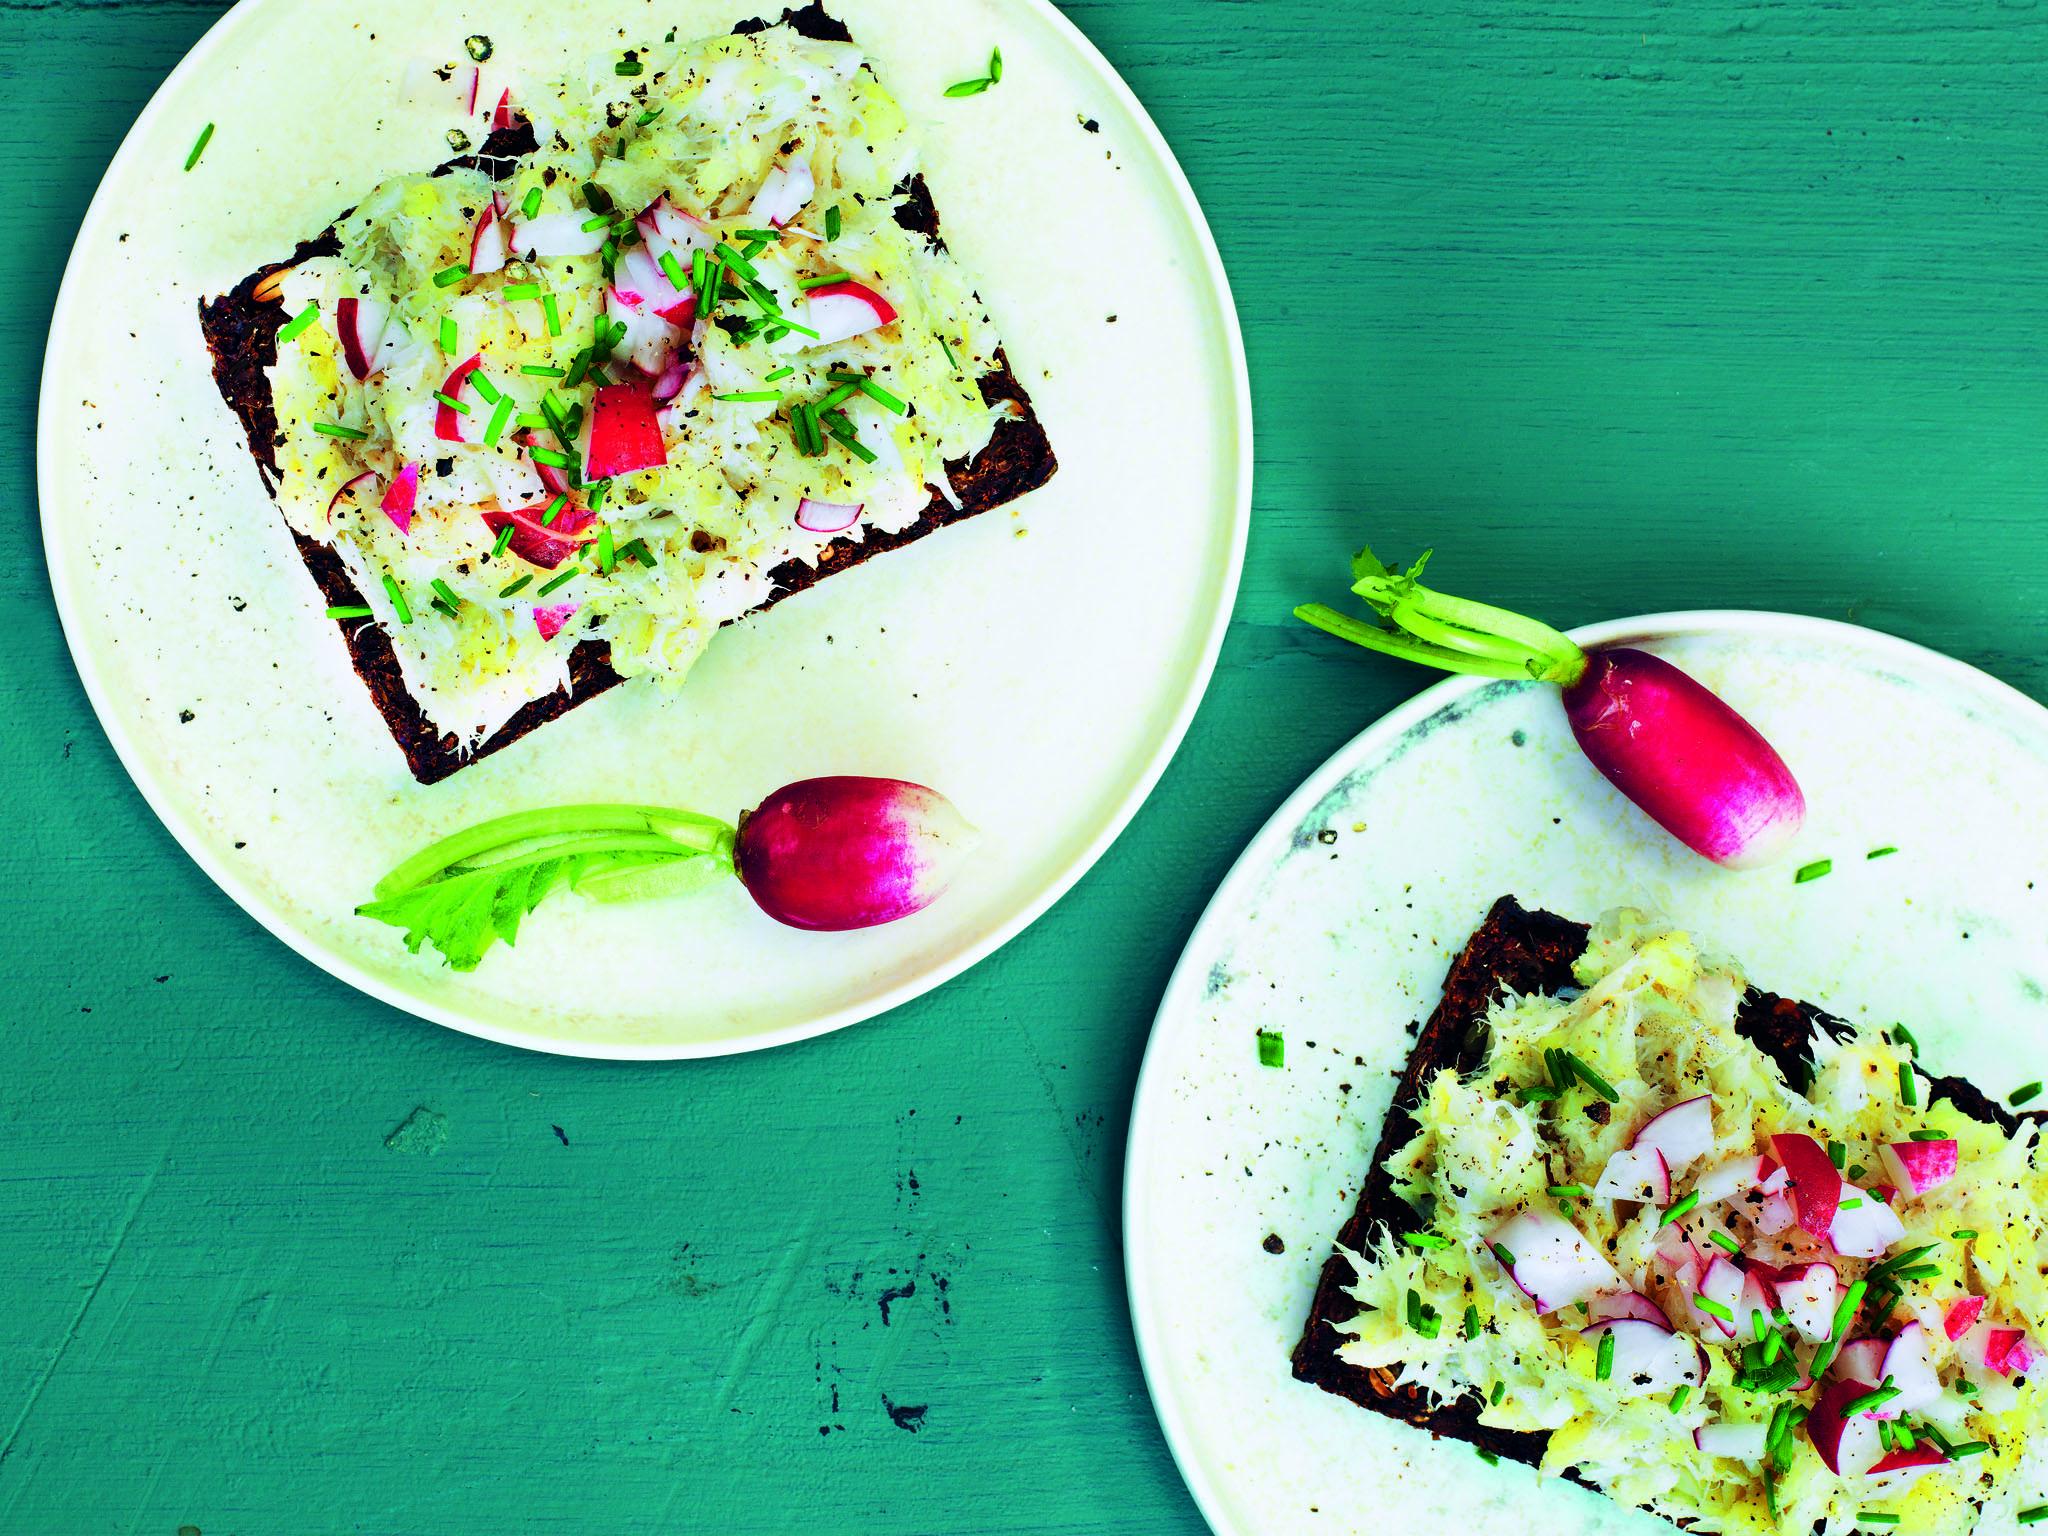 Radishes to riches: yesterday’s leftovers are today’s special